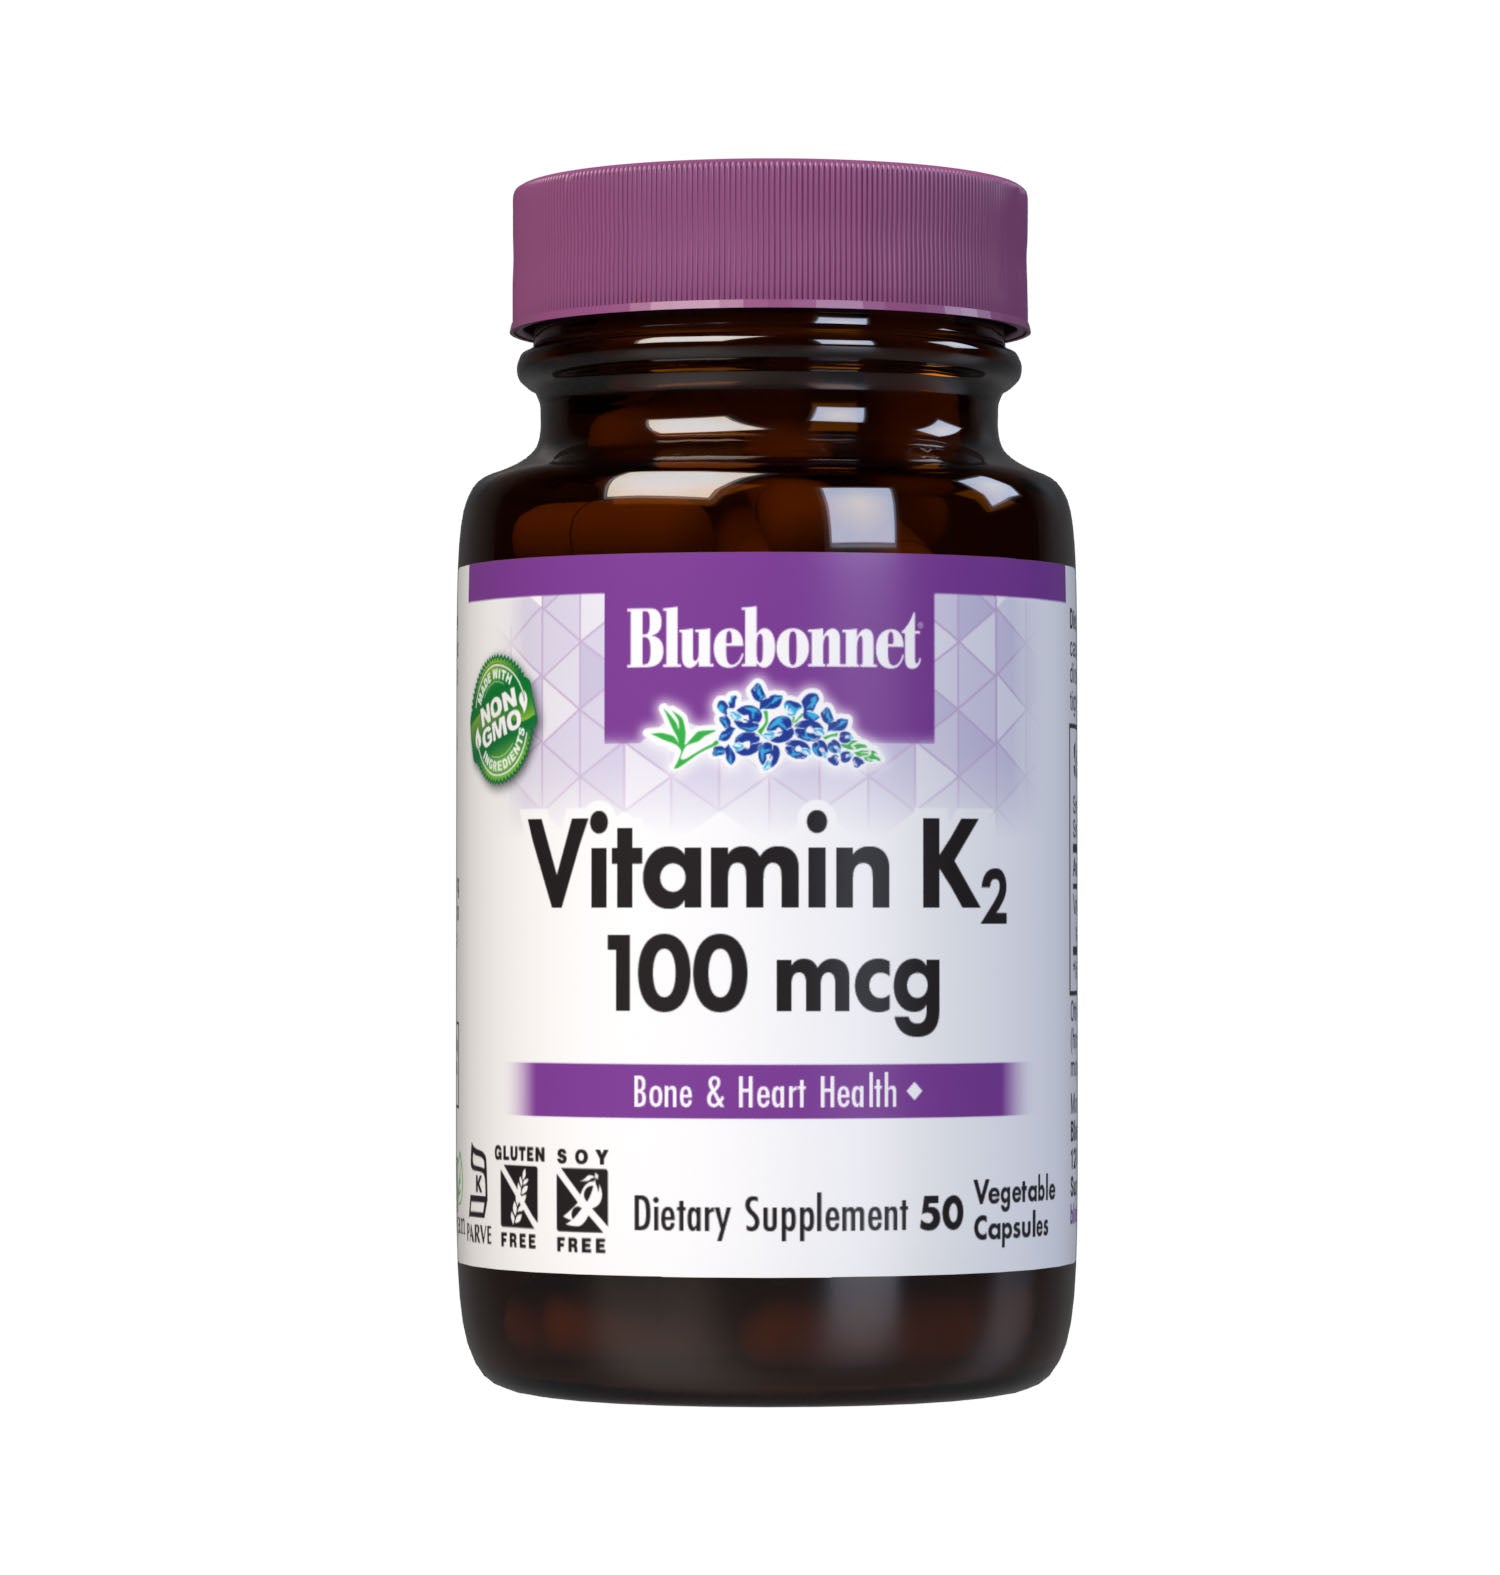 Bluebonnet’s Vitamin K2 100 mcg 50 Vegetable Capsules are formulated with Menaquinone-7 (MK-7) which is produced through a patented biofermentation process from Bacillus subtilis natto cultures. Menaquinone-7 is an enhanced bioactive form of vitamin K2 to help support bone and cardiovascular health. #size_50 count